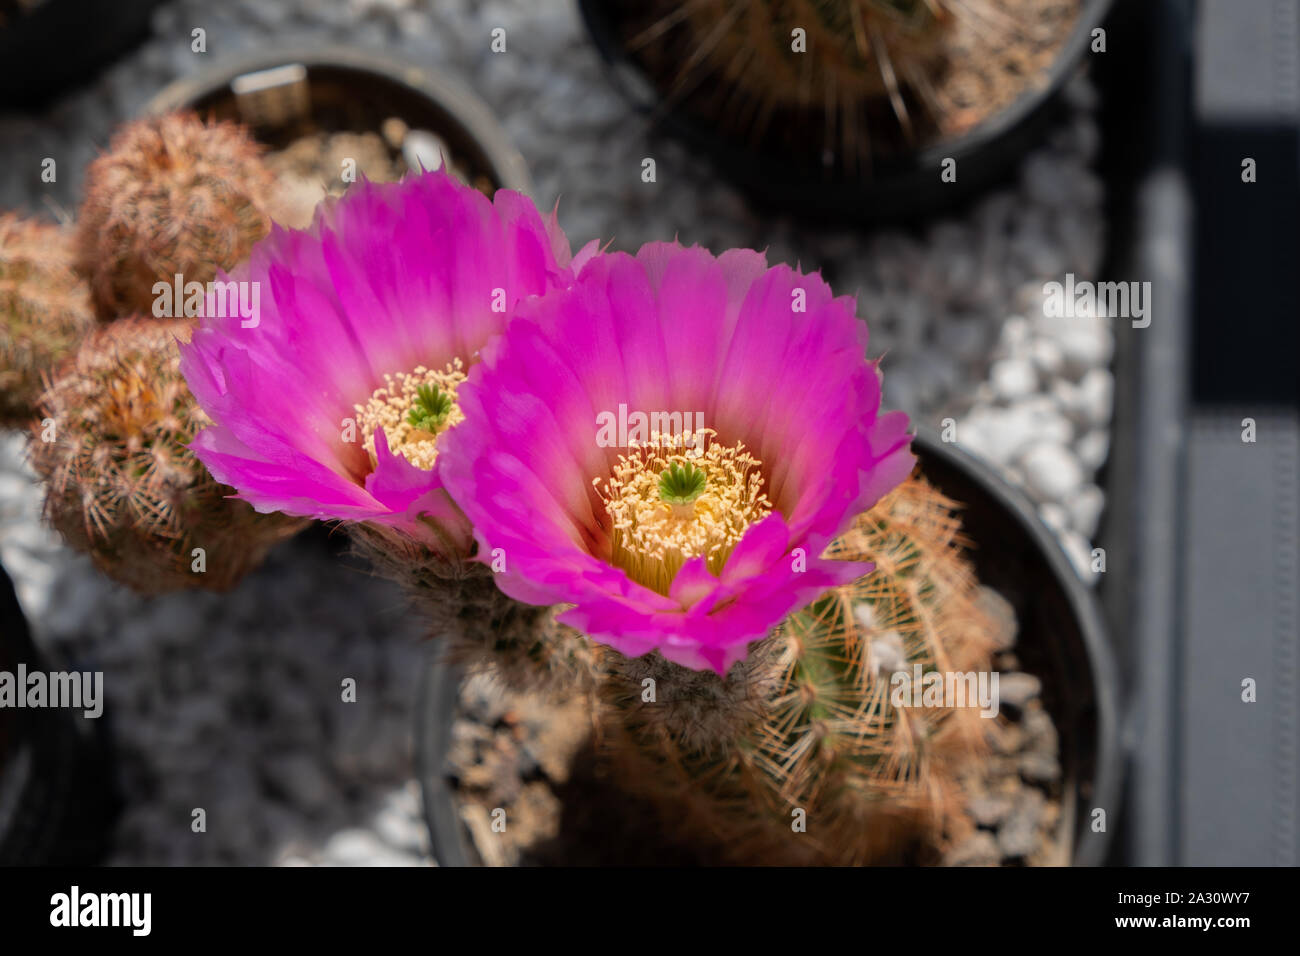 Close up of cactus (Echinocereus Reichenbachii) with two pink flowers in a flowerpot Stock Photo